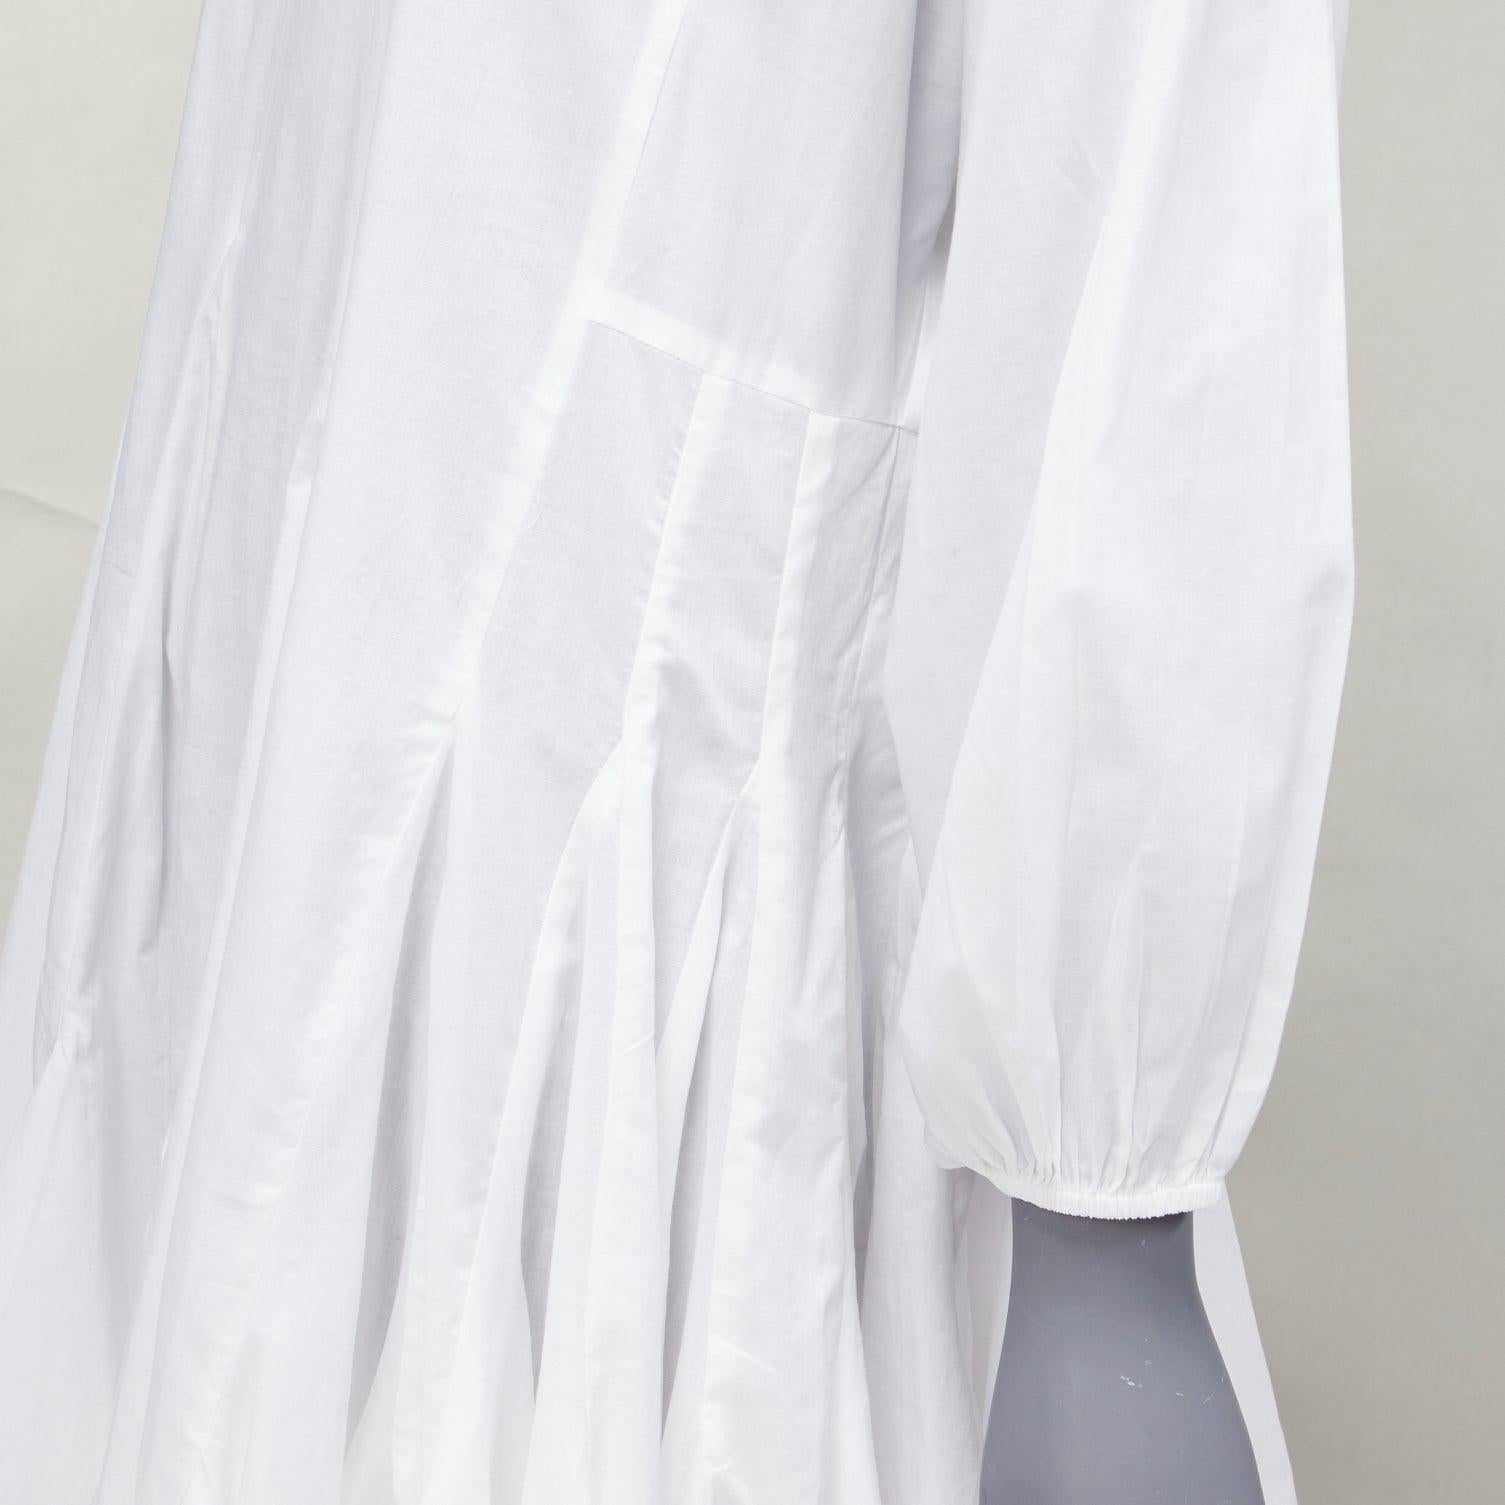 RHODE Ella white cotton long sleeve flutter hem tent dress XS
Reference: AAWC/A01153
Brand: Rhode
Model: Ella
Material: Cotton
Color: White
Pattern: Solid
Closure: Keyhole Button
Lining: White Cotton
Extra Details: Keyhole hook and eye closure.